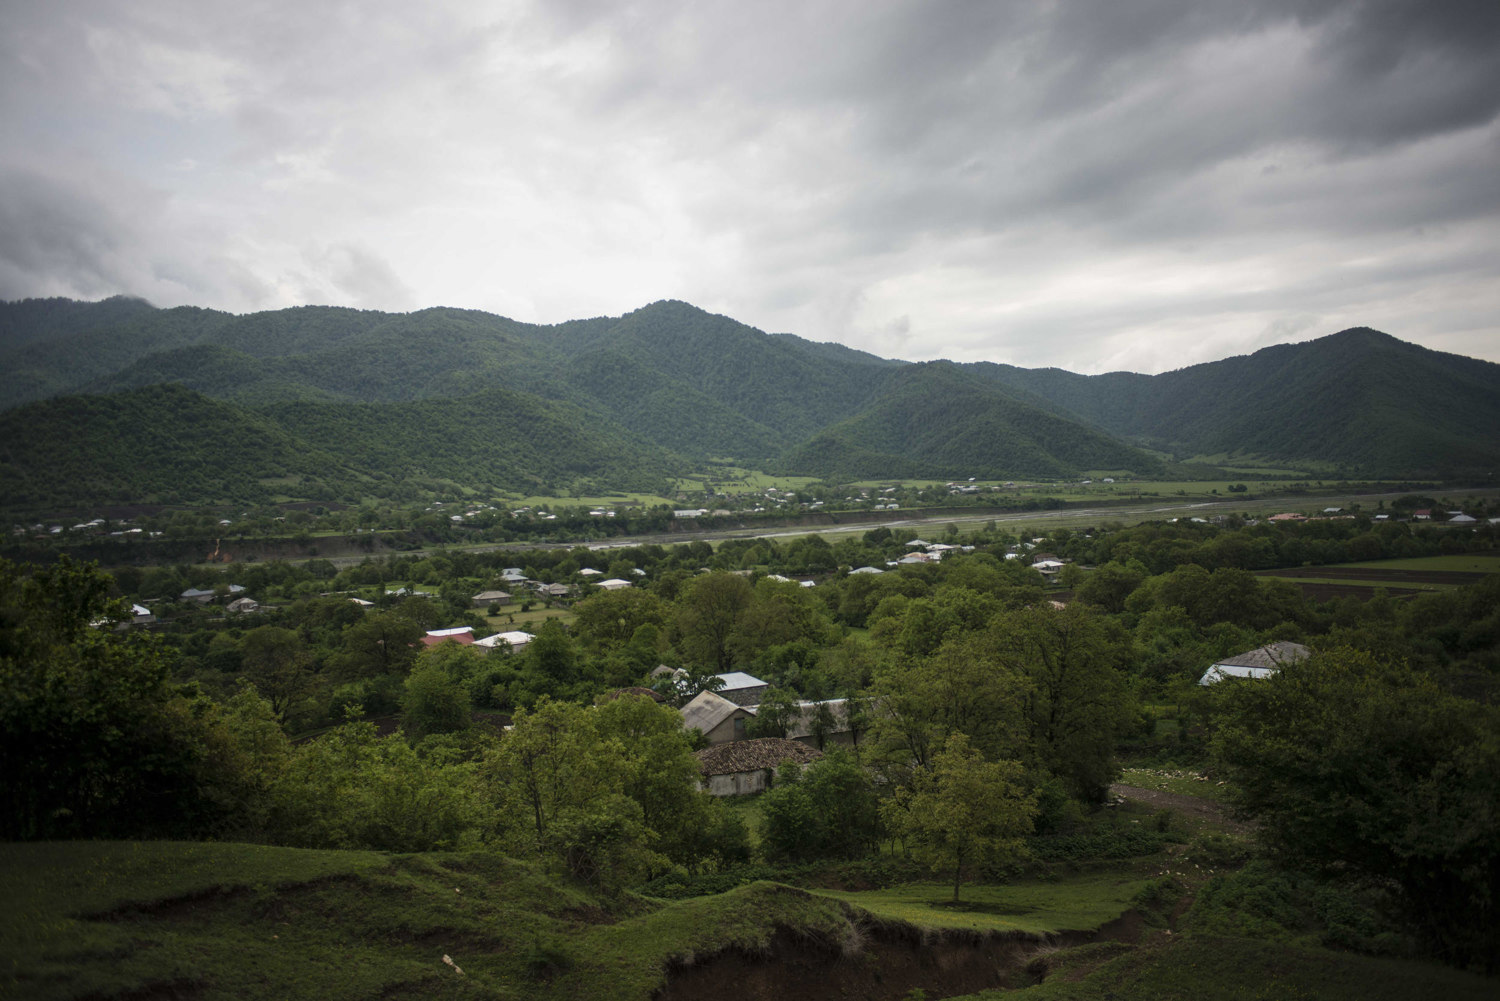  The Pankisi Valley, a secluded muslim village in the hills of Georgia. This traditionally muslim area has seen a resurgance of sufism.&nbsp; 